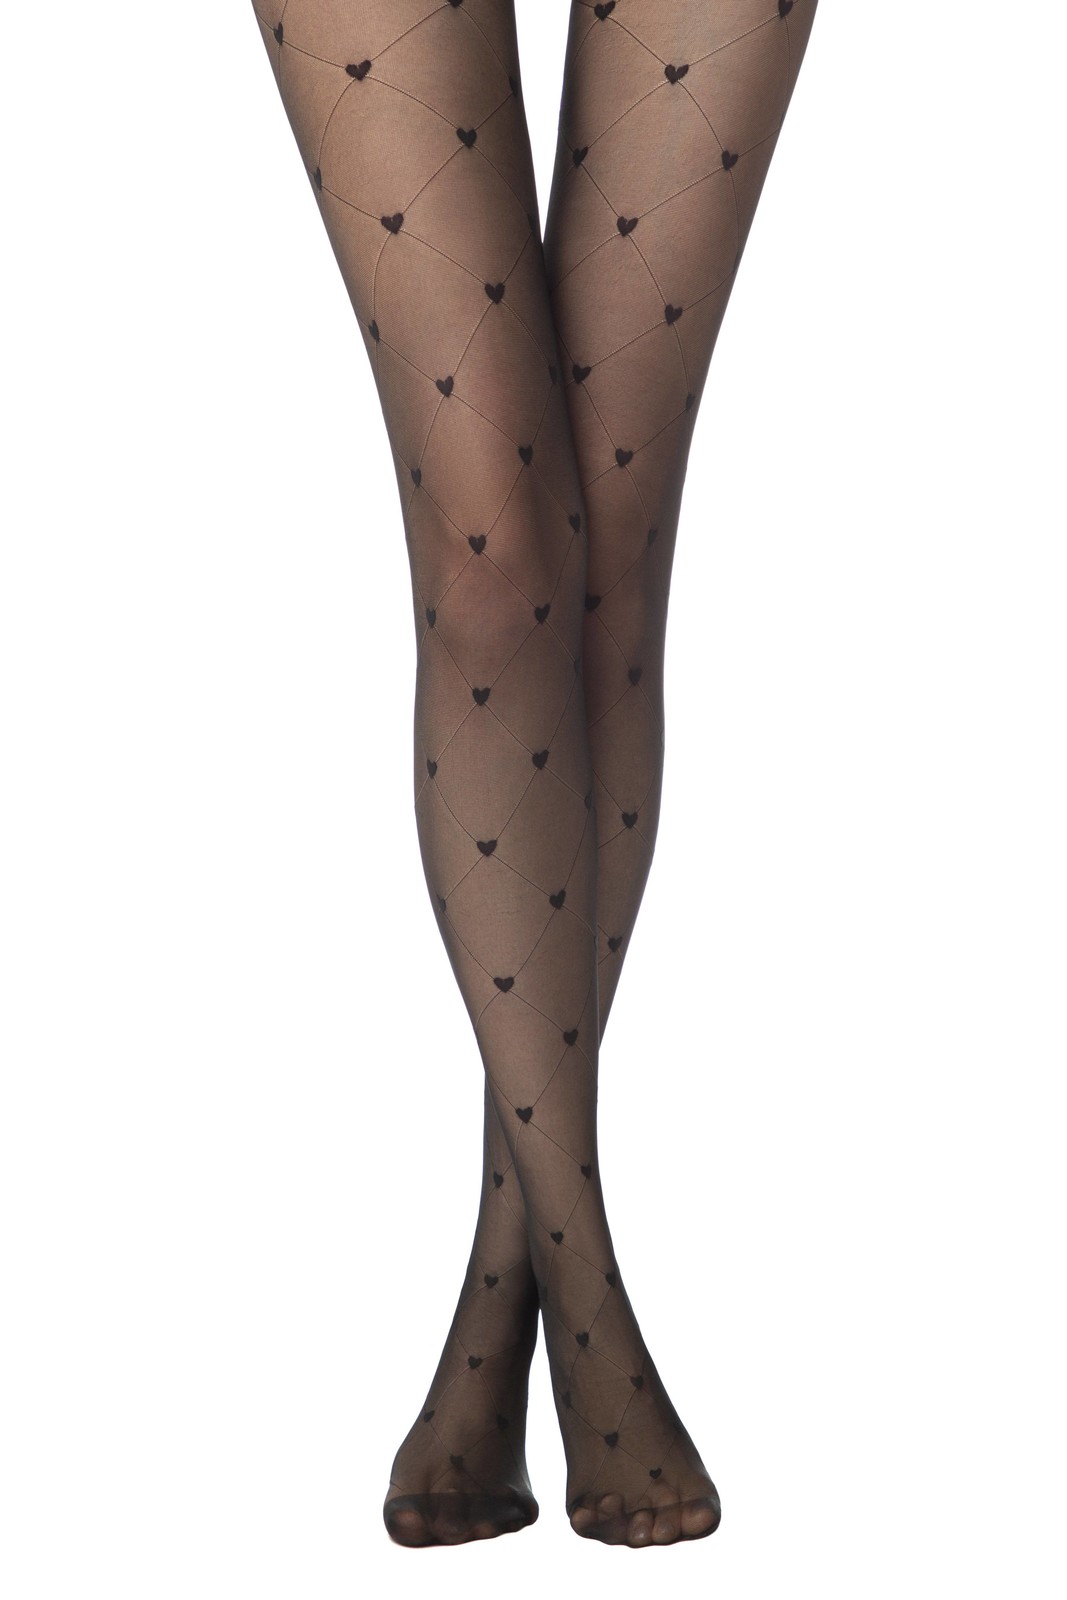 Conte Woman's Tights & Thigh High Socks Lovers